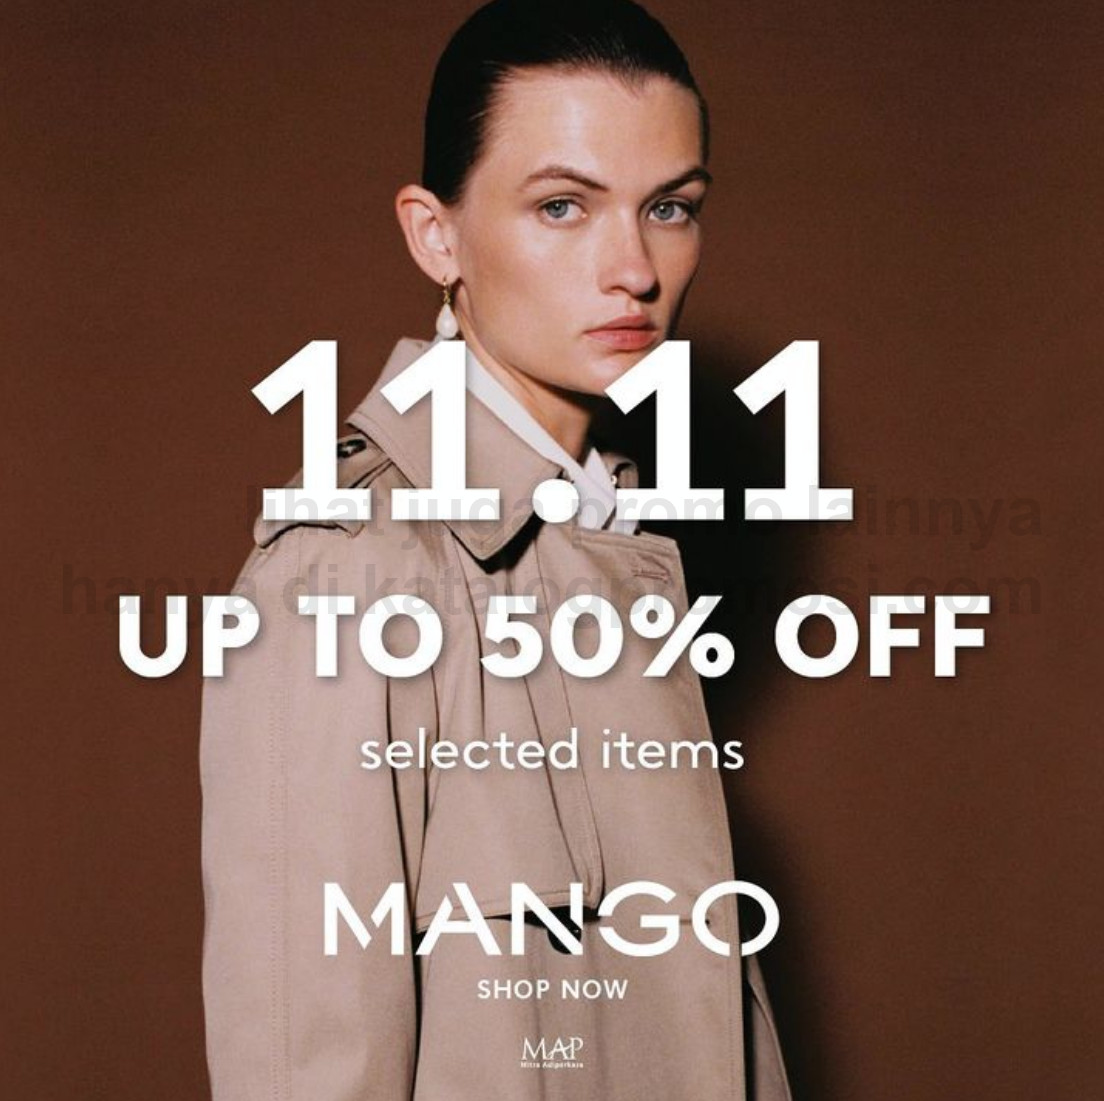 PROMO MANGO Celebrate 11.11 - DISCOUNT up to 50% OFF + EXTRA 10% OFF